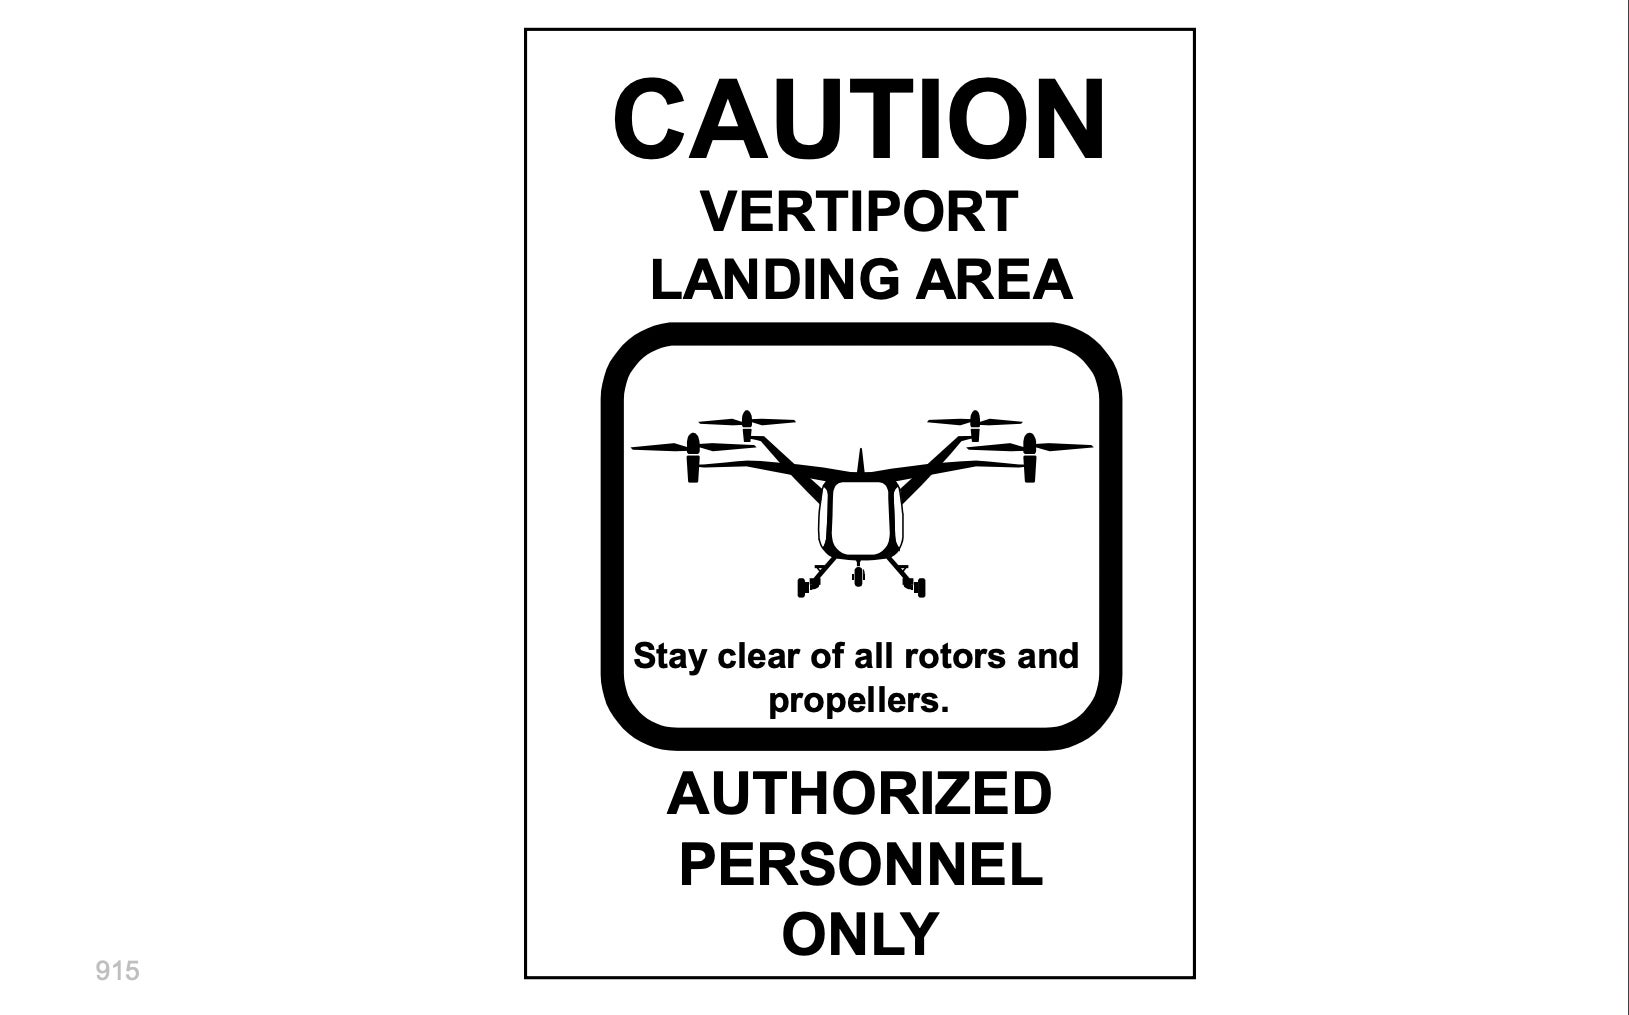 What Safety Features Should eVTOL Vertiports Include?